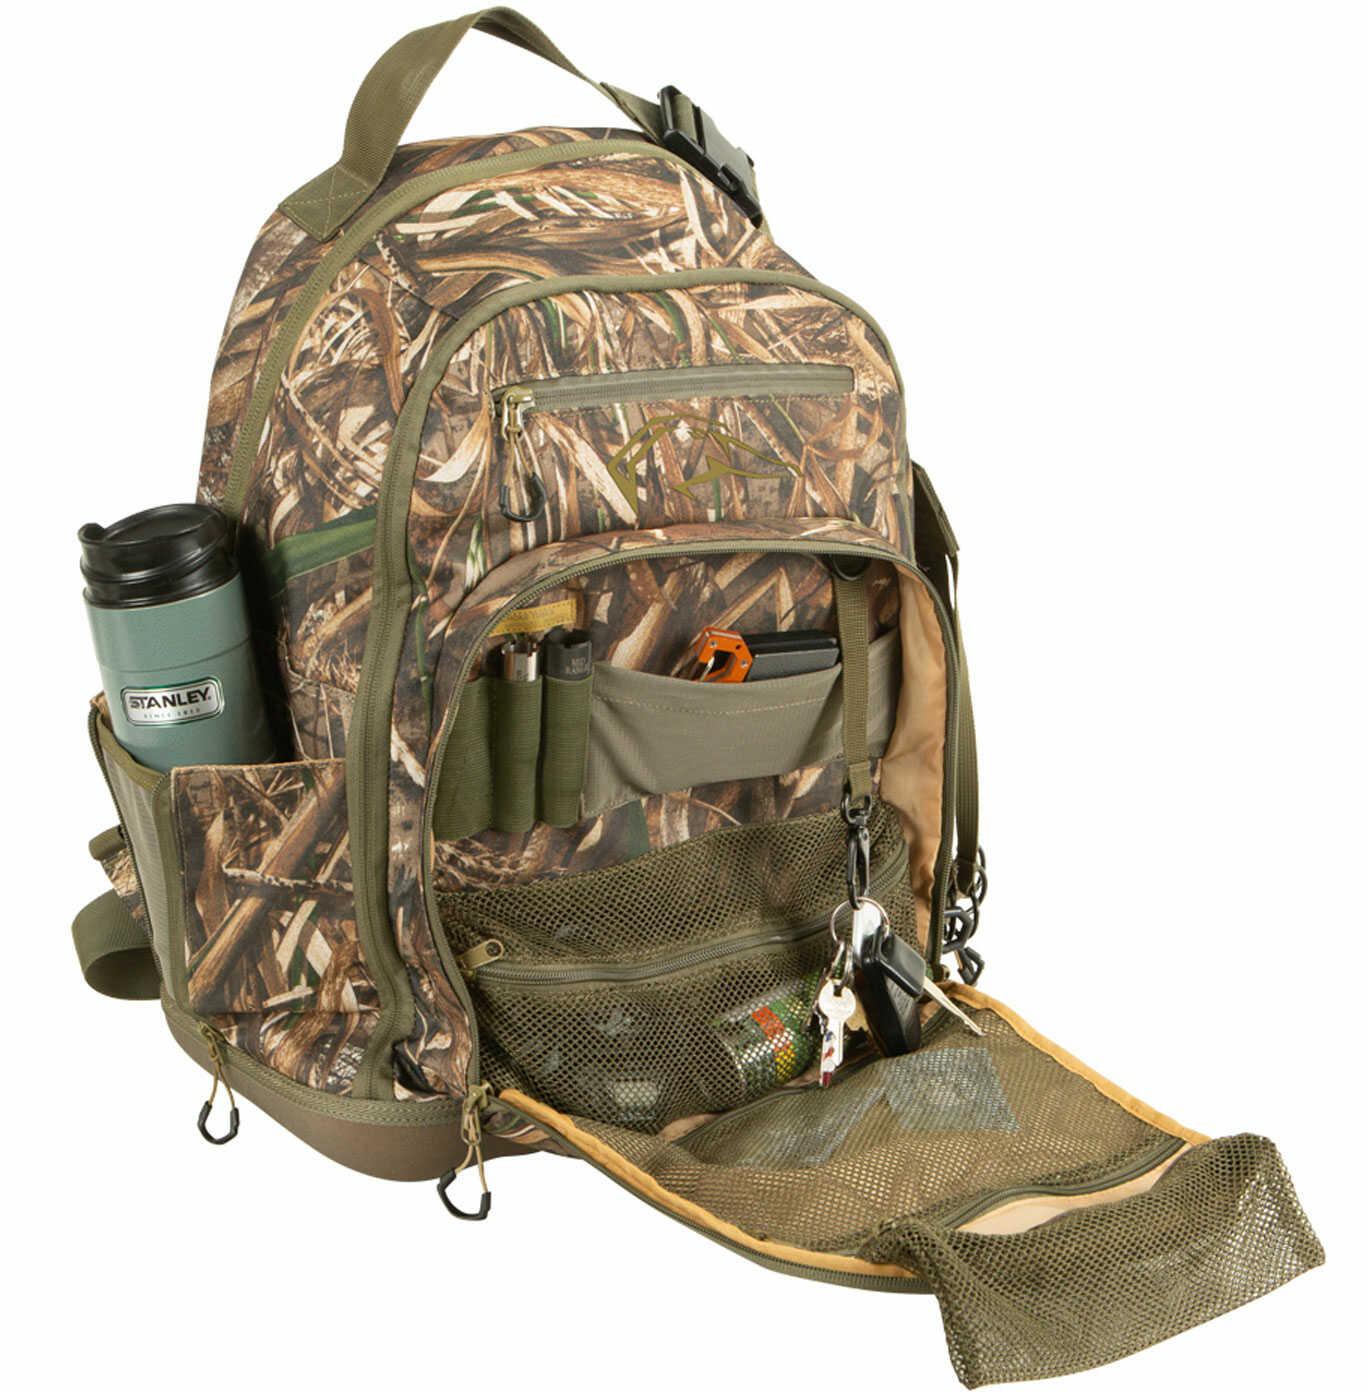 Allen Gear-Fit Pursuit Punisher Waterfowl Multi-Function Pack Realtree Max-5